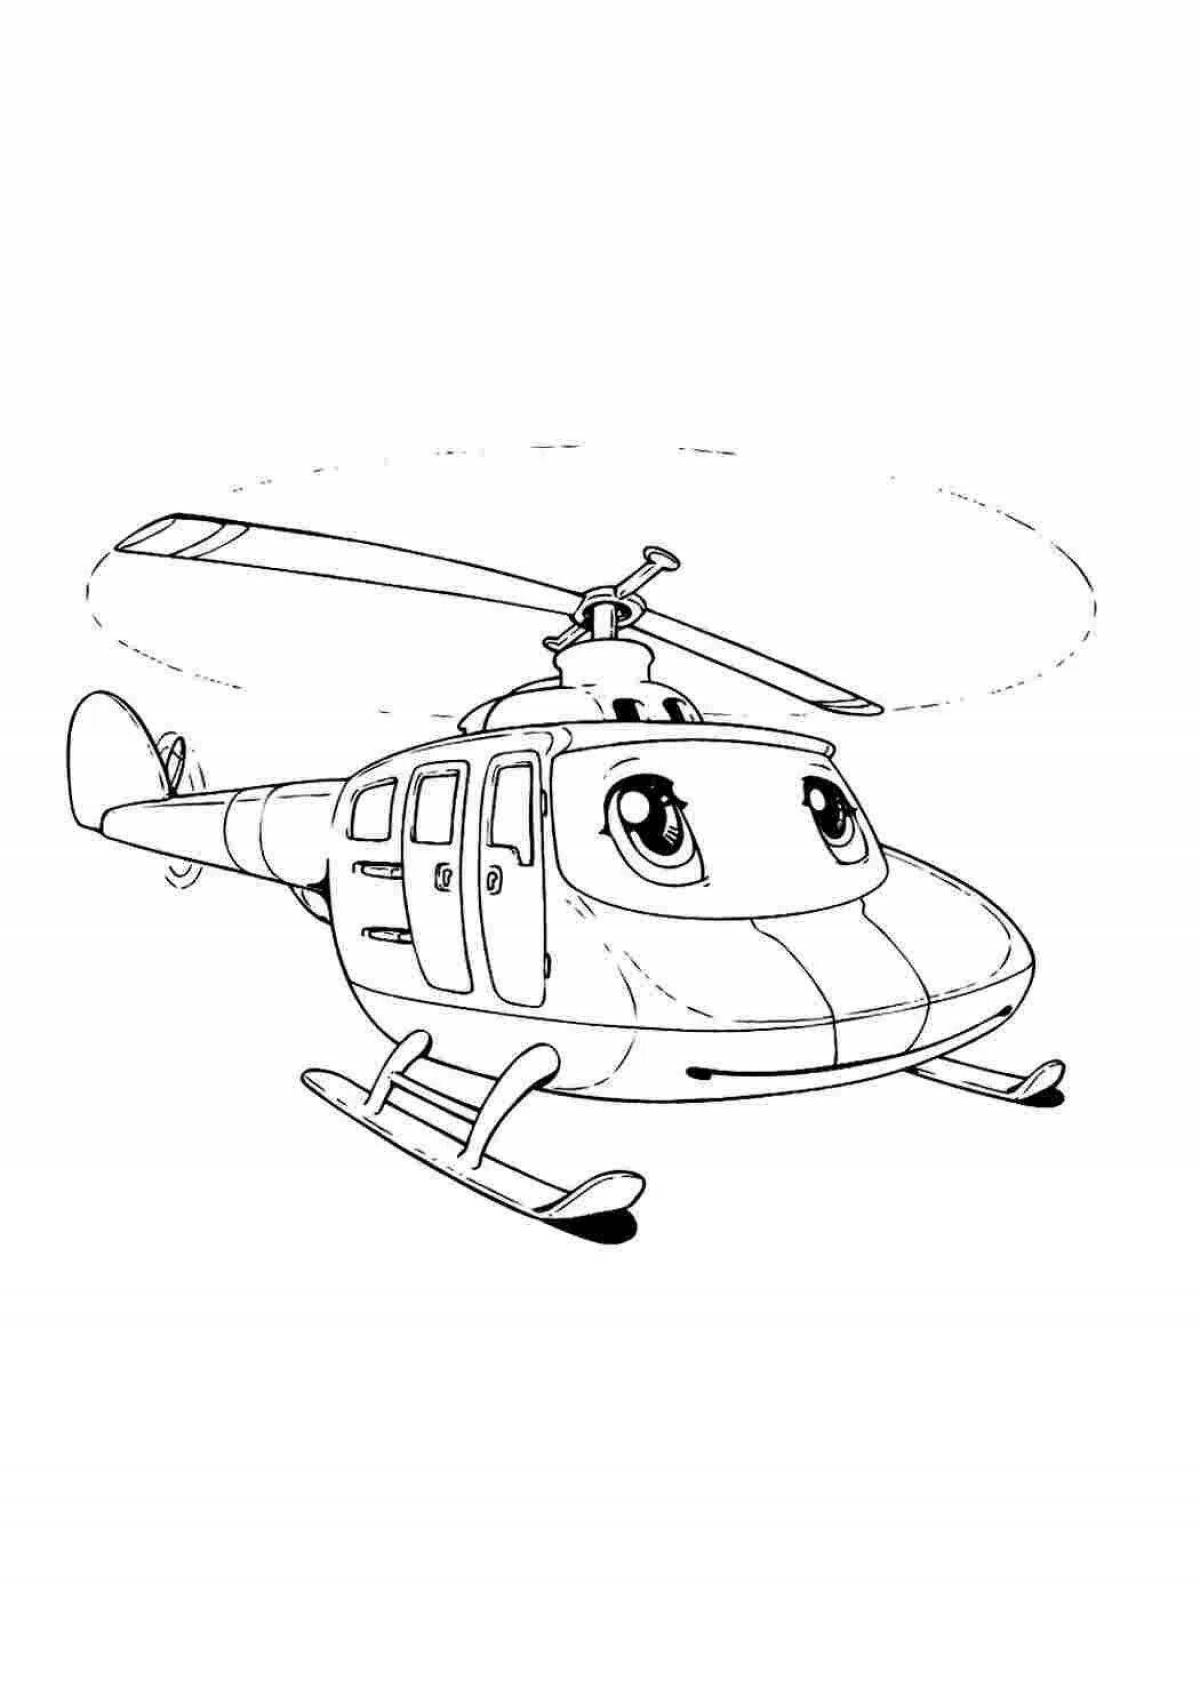 Funny police helicopter coloring book for kids